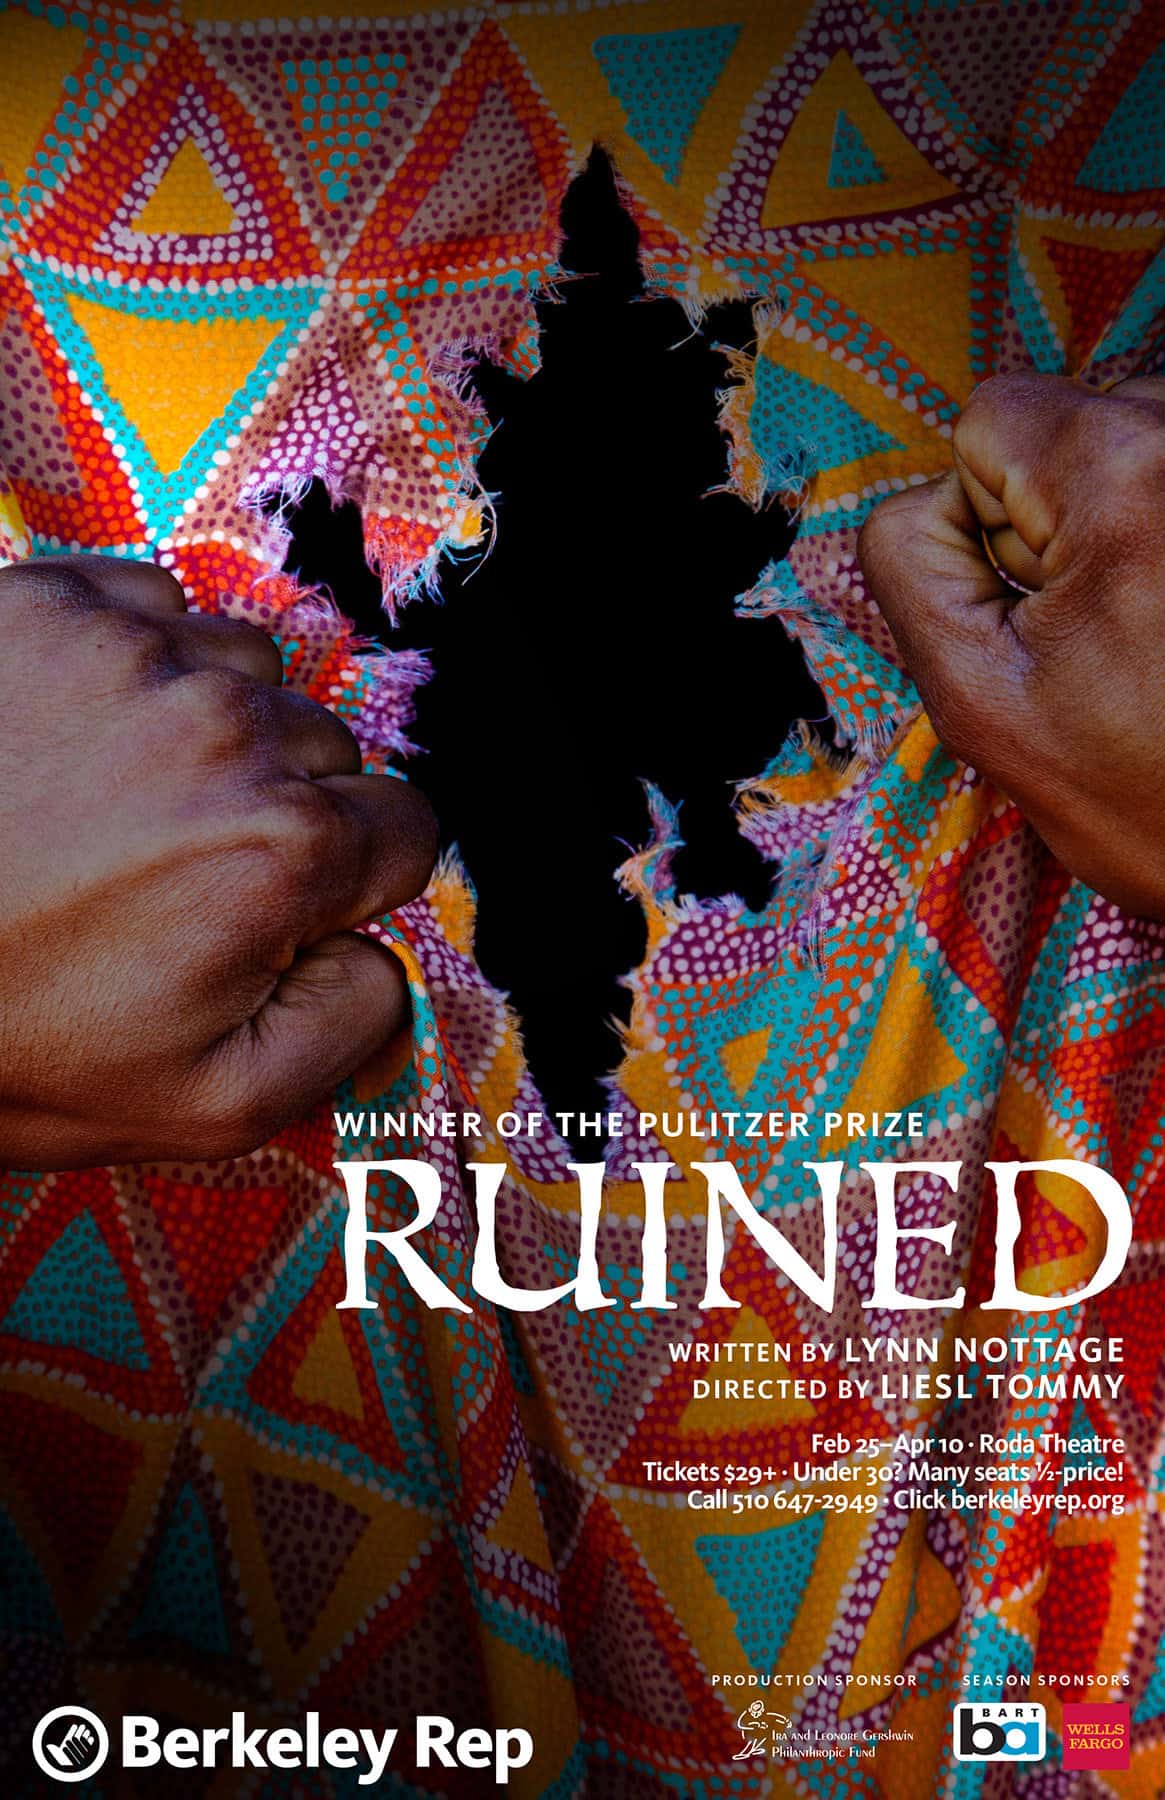 Poster for Lynn Nottage's "Ruined" at Berkeley Rep. Image is a beautiful piece of cloth in a triangular geometric pattern in red, yellow, purple, and turquoise reminiscent of fabric from Congo, being violently torn apart by two hands. The void within the rip is black and centered on the poster.